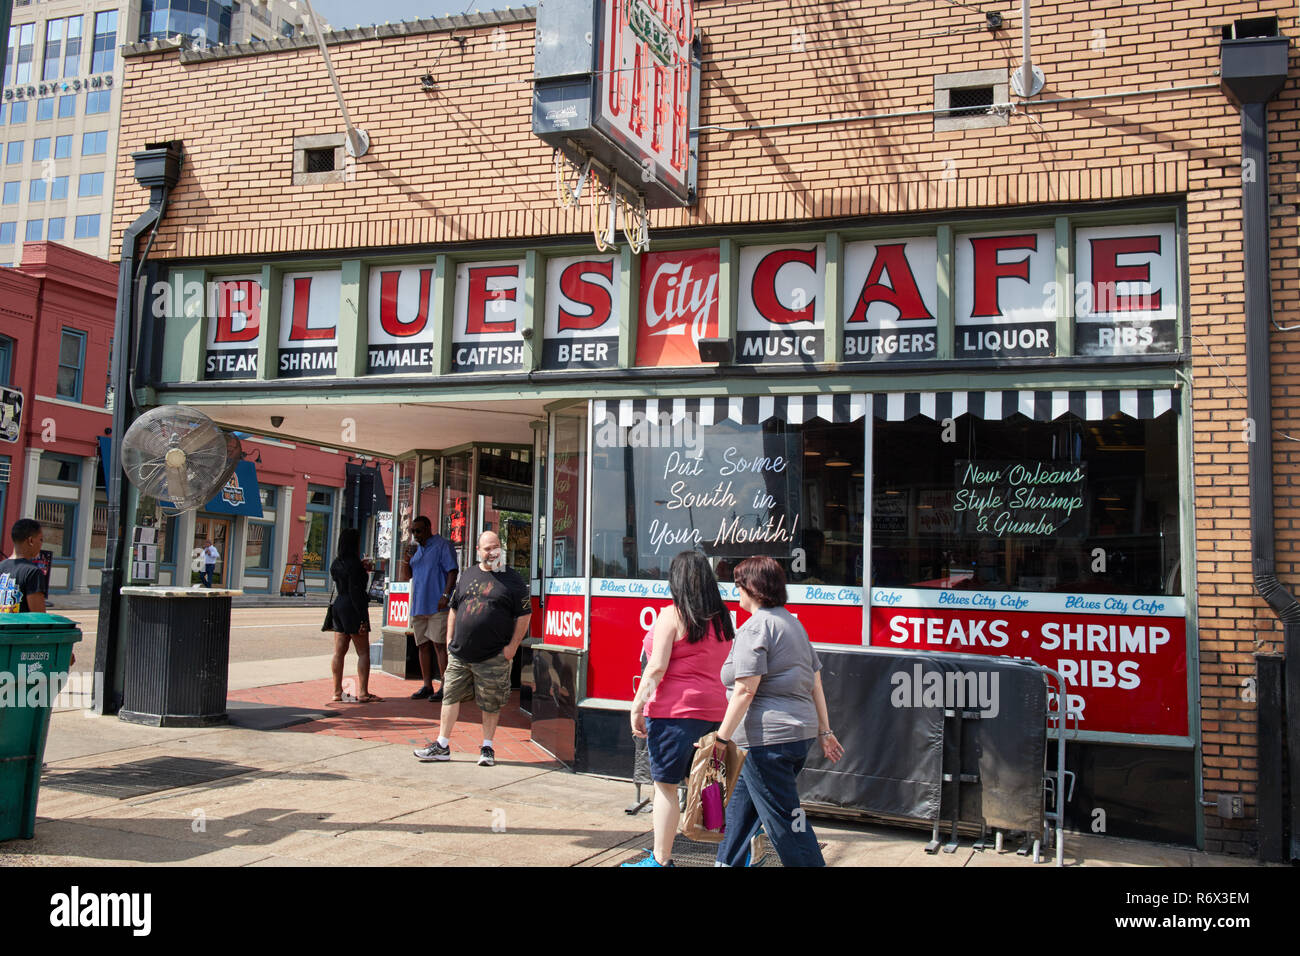 Il Blues City Cafe on Beale Street a Memphis, Tennessee Foto Stock